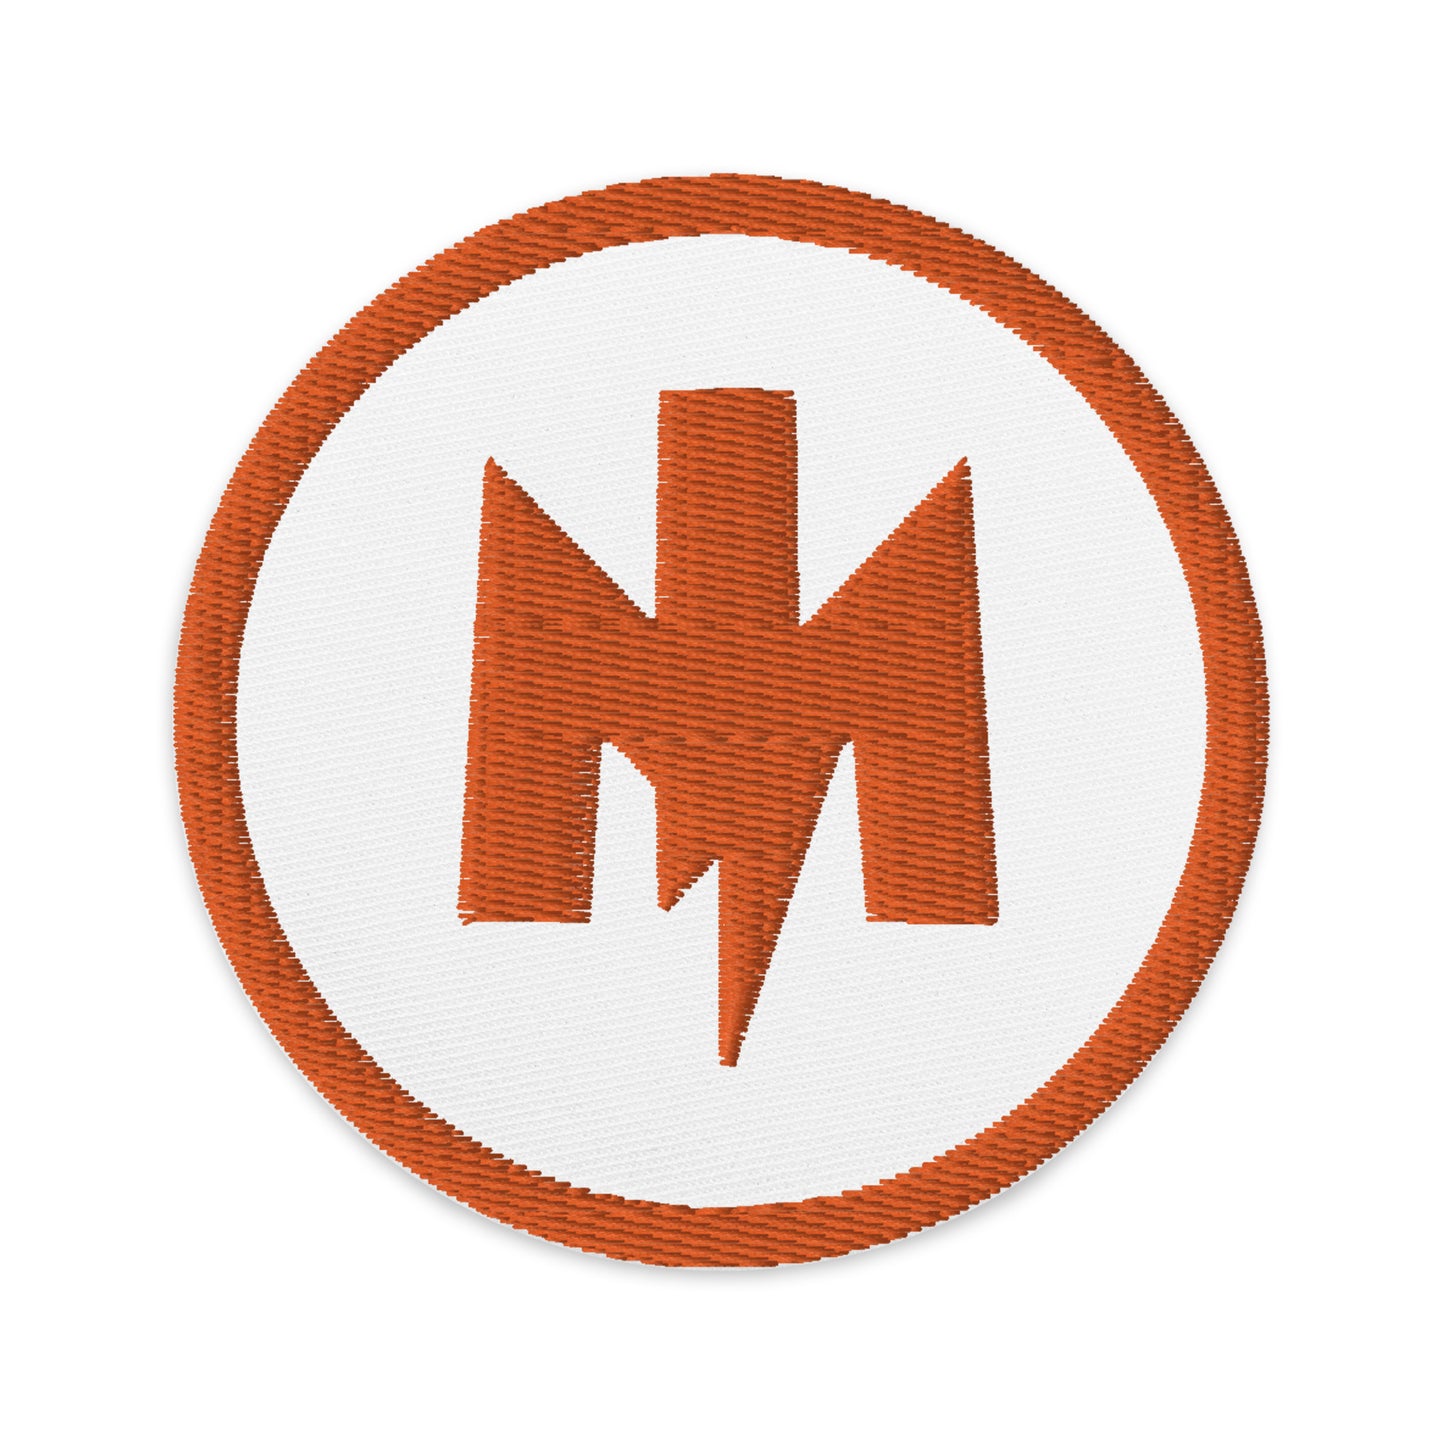 MotoIconic Circular M-Lightning Logo Embroidered patches